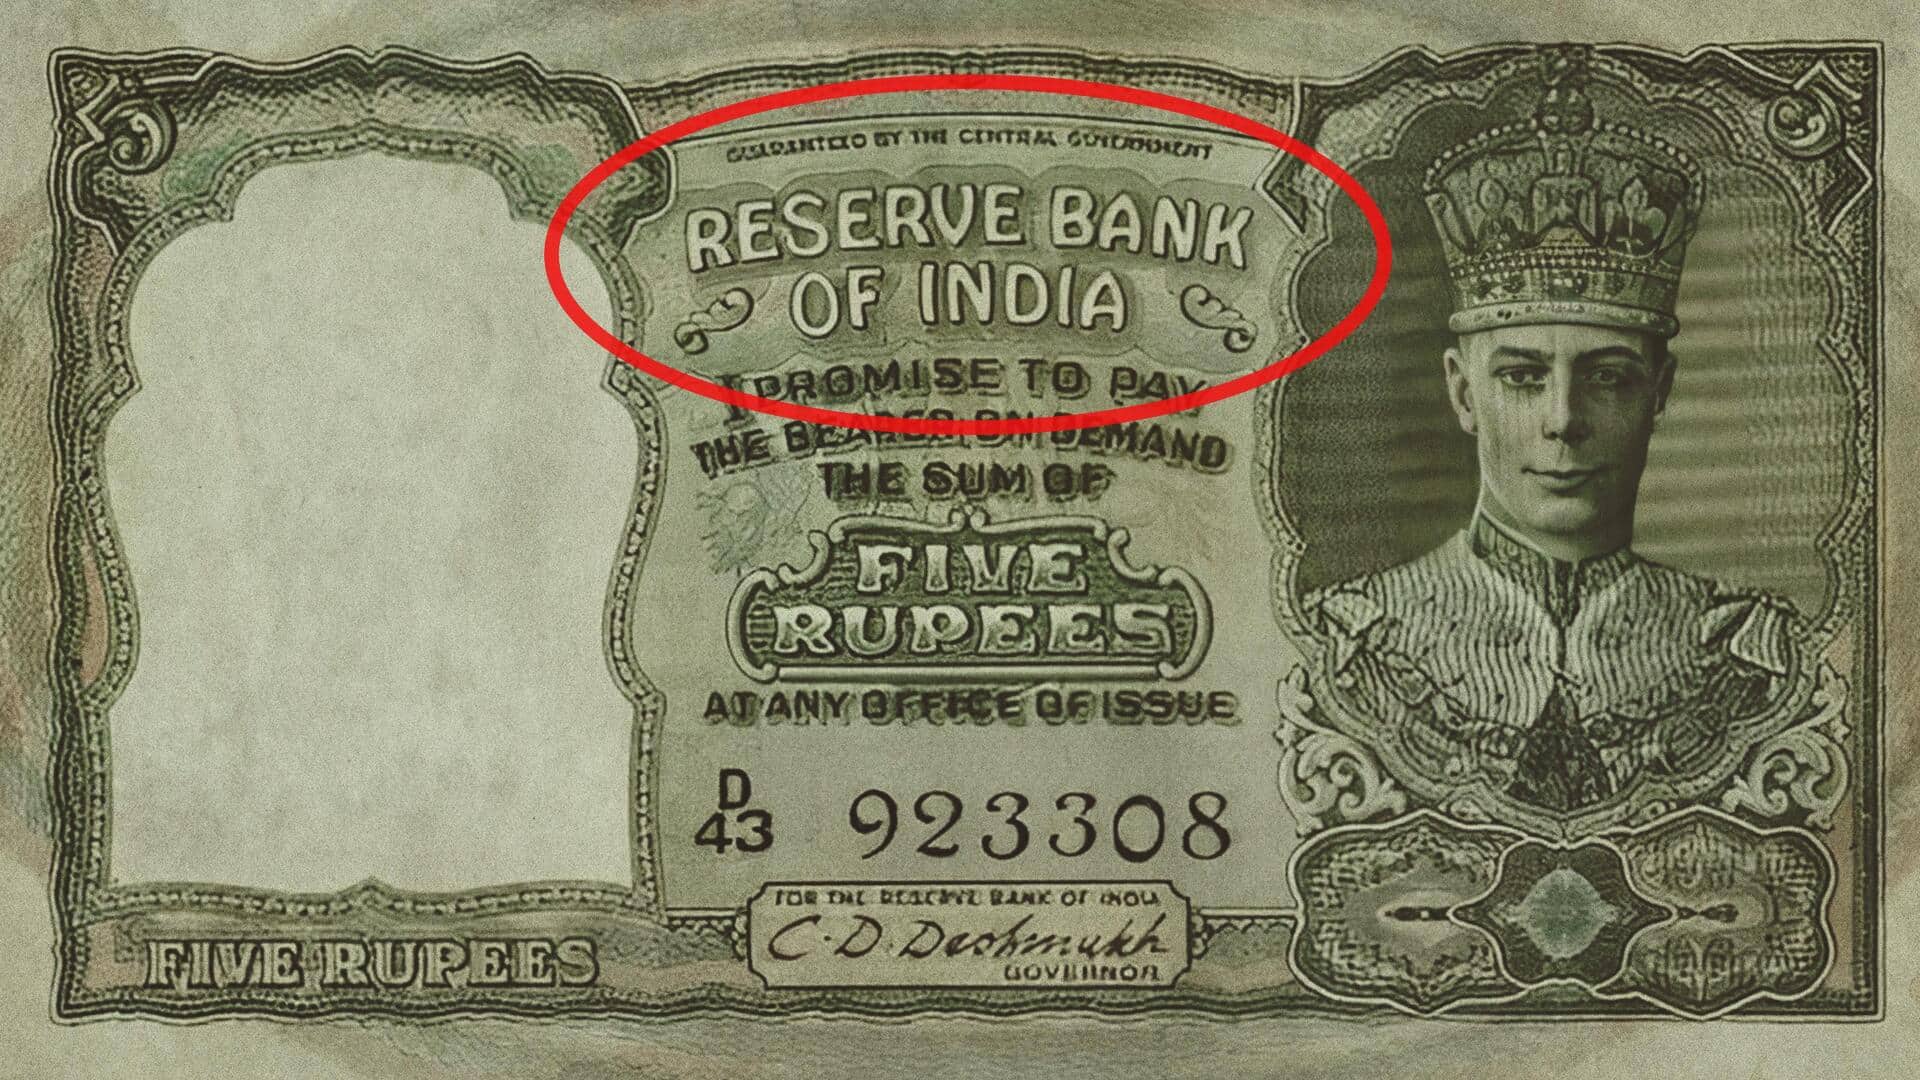 India printed currency for Pakistan for one year after independence 